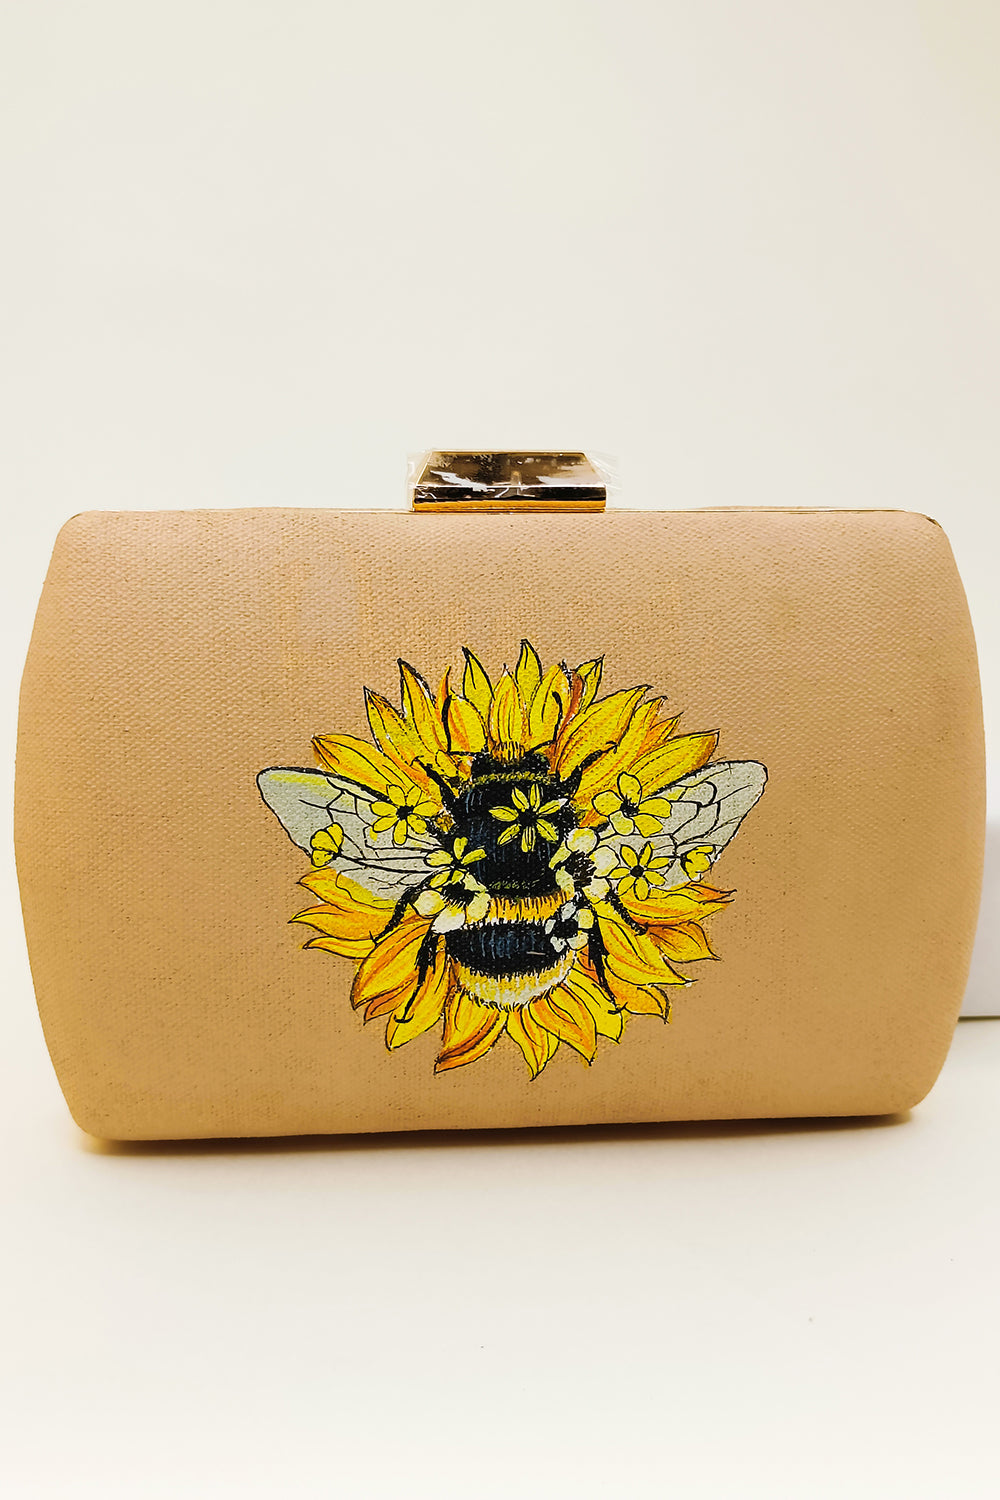 Hand Painted Clutch with a Bumble Bee on Sunflower